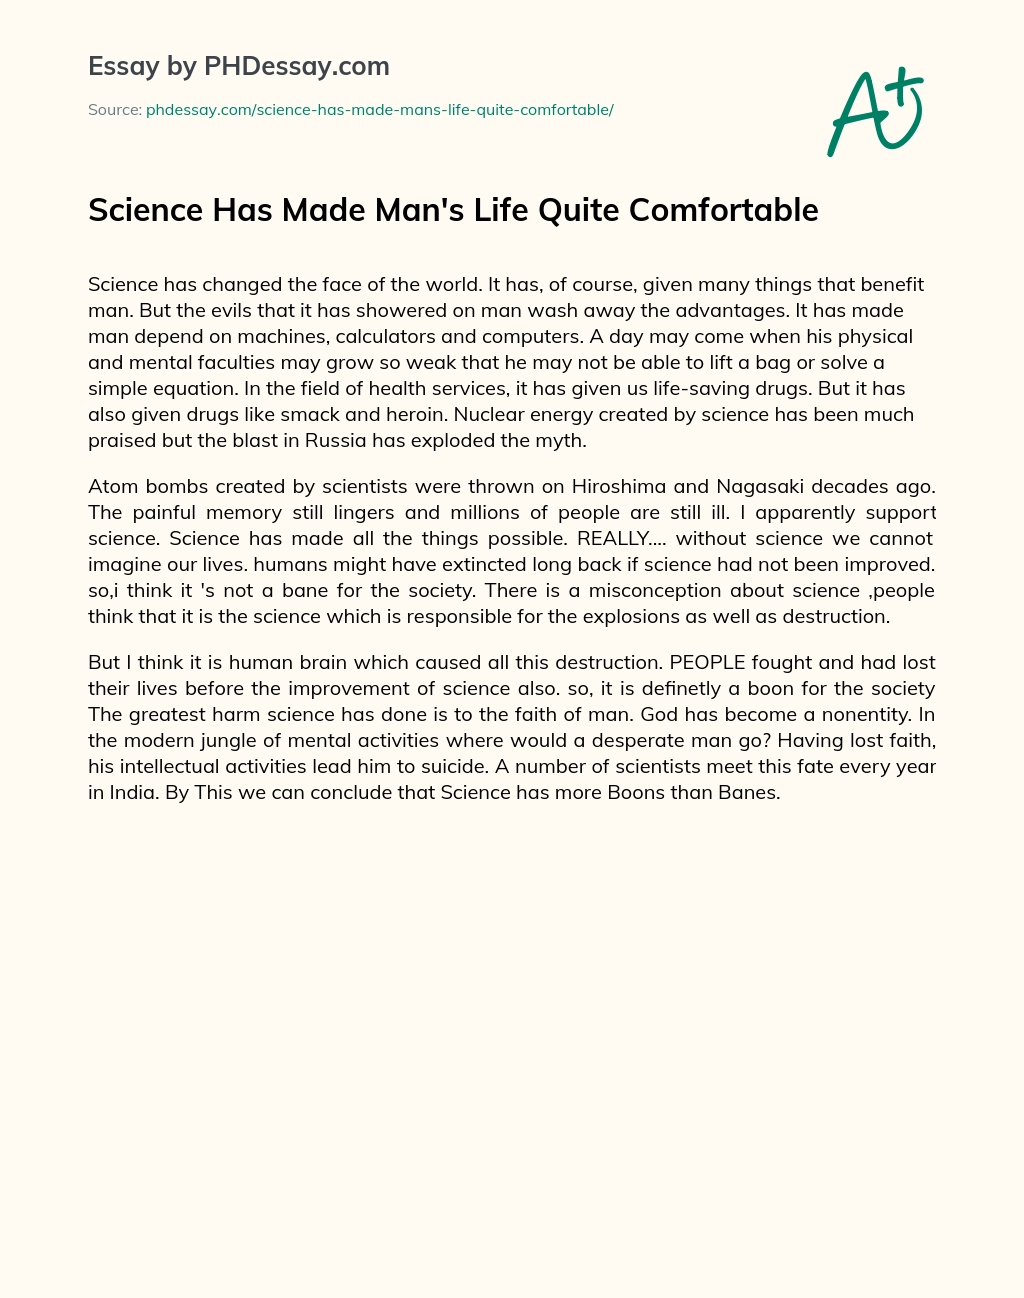 Science Has Made Man’s Life Quite Comfortable essay